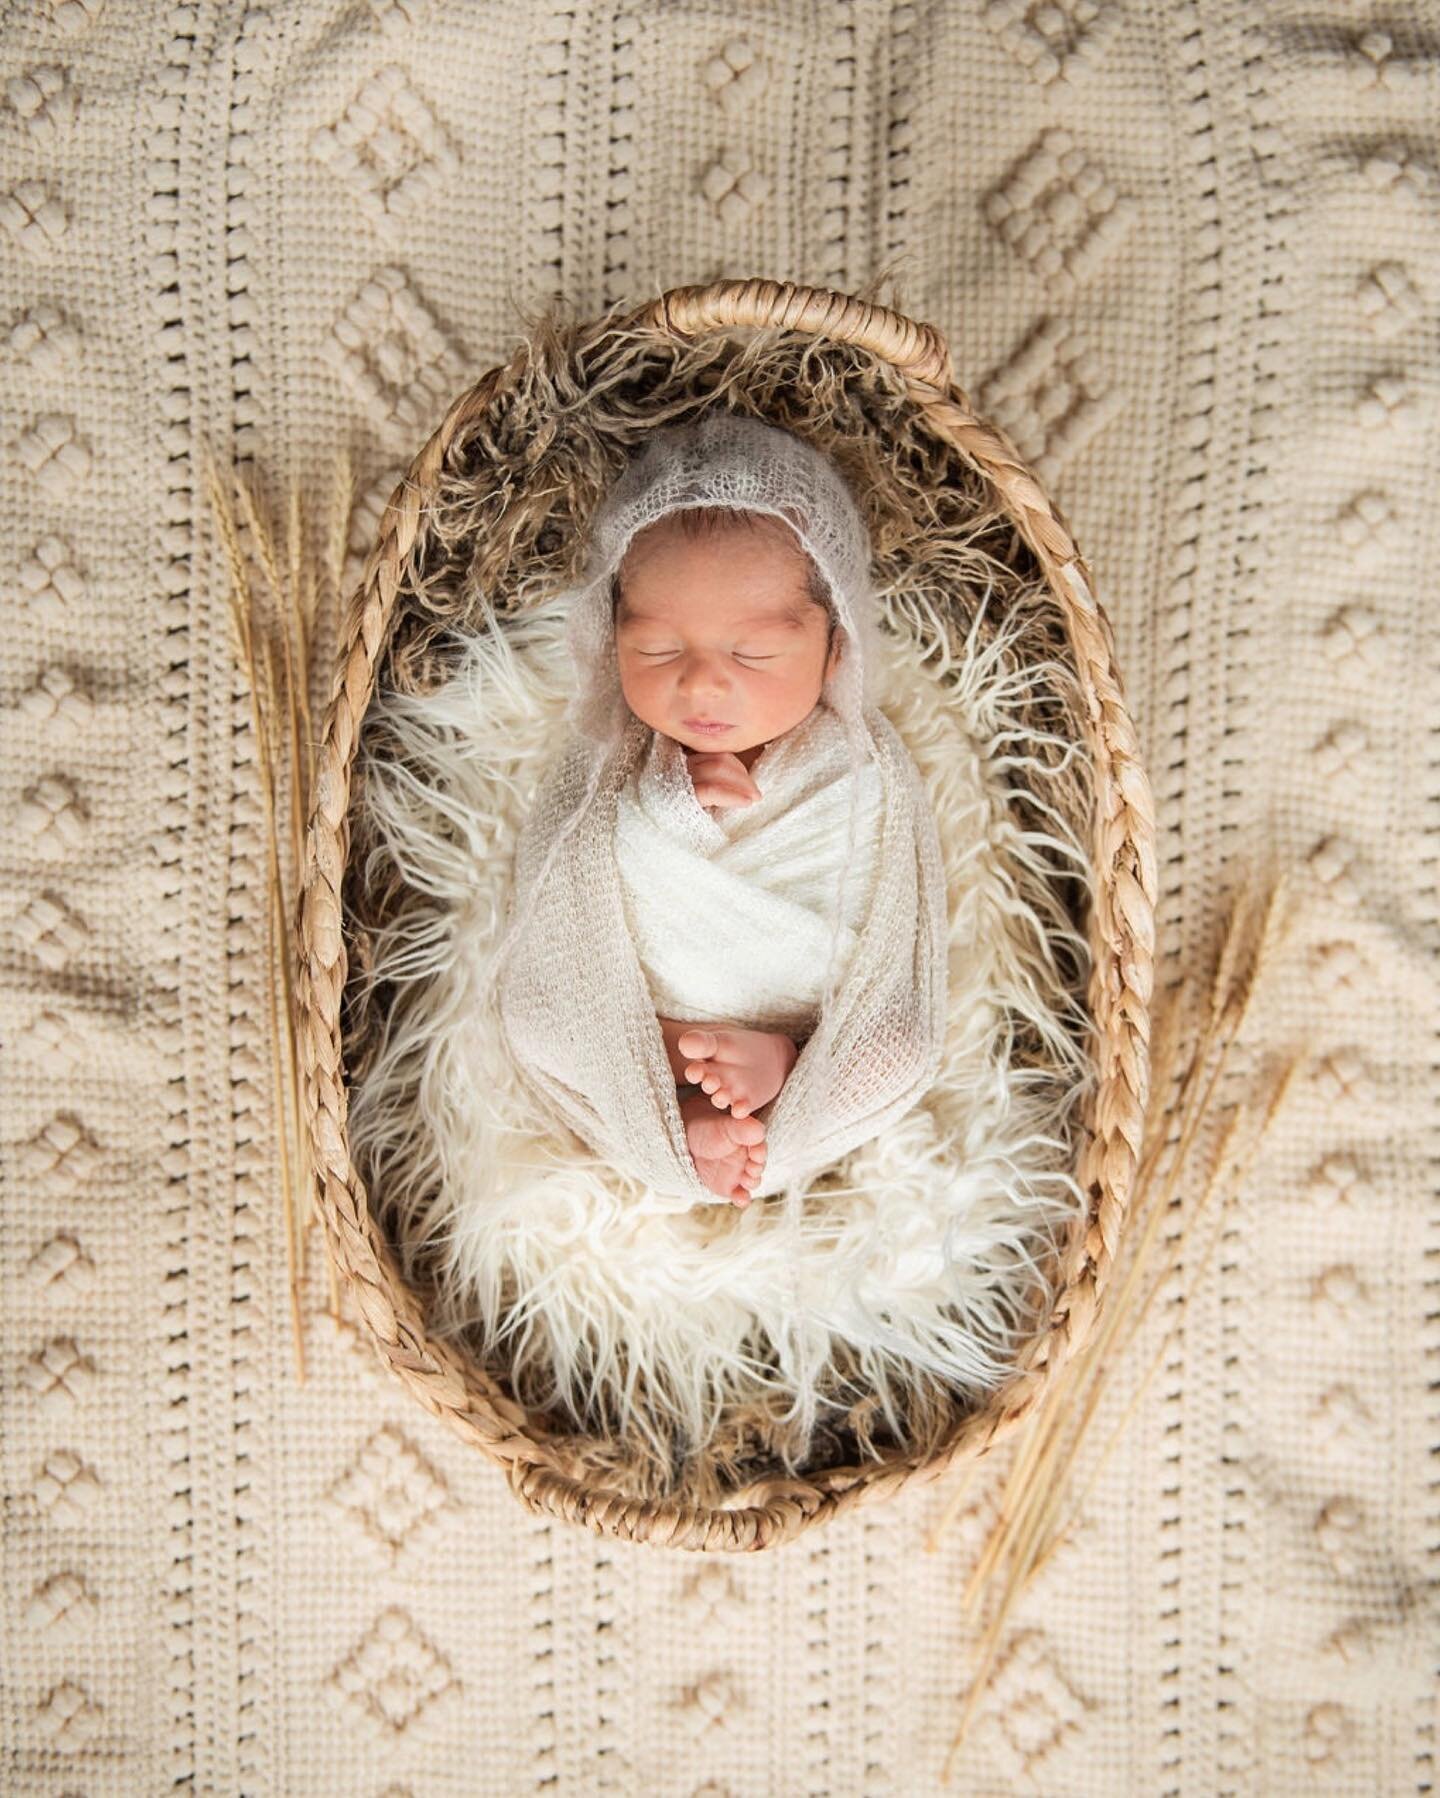 I&rsquo;ve loved all the sleeping newborns this year 💫 

#newborn #newbornphotography #newbornphotographer #yucaipa #redlands #yucaipaphotographer #redlandsphotographer #capturethemoment #reflectingyourstory